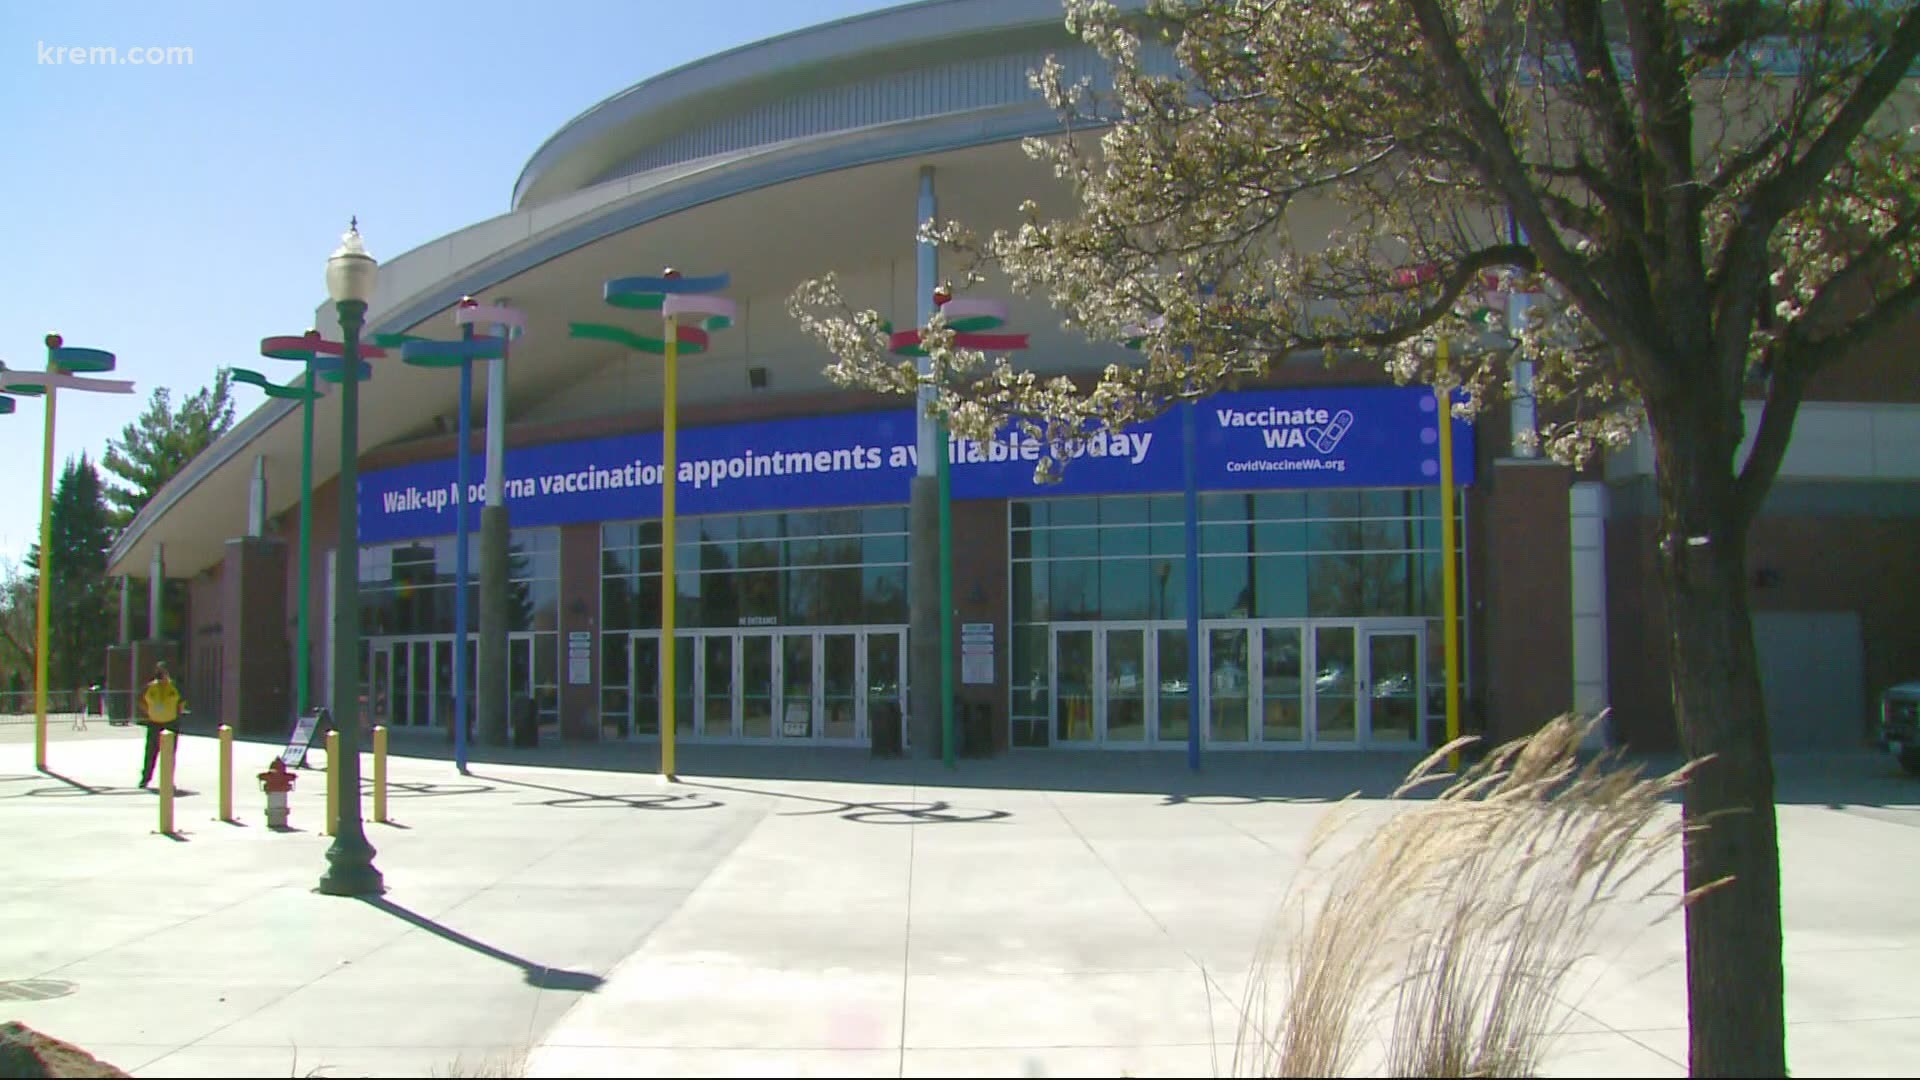 The vaccination site at the Spokane arena will close on Thursday, June 17.